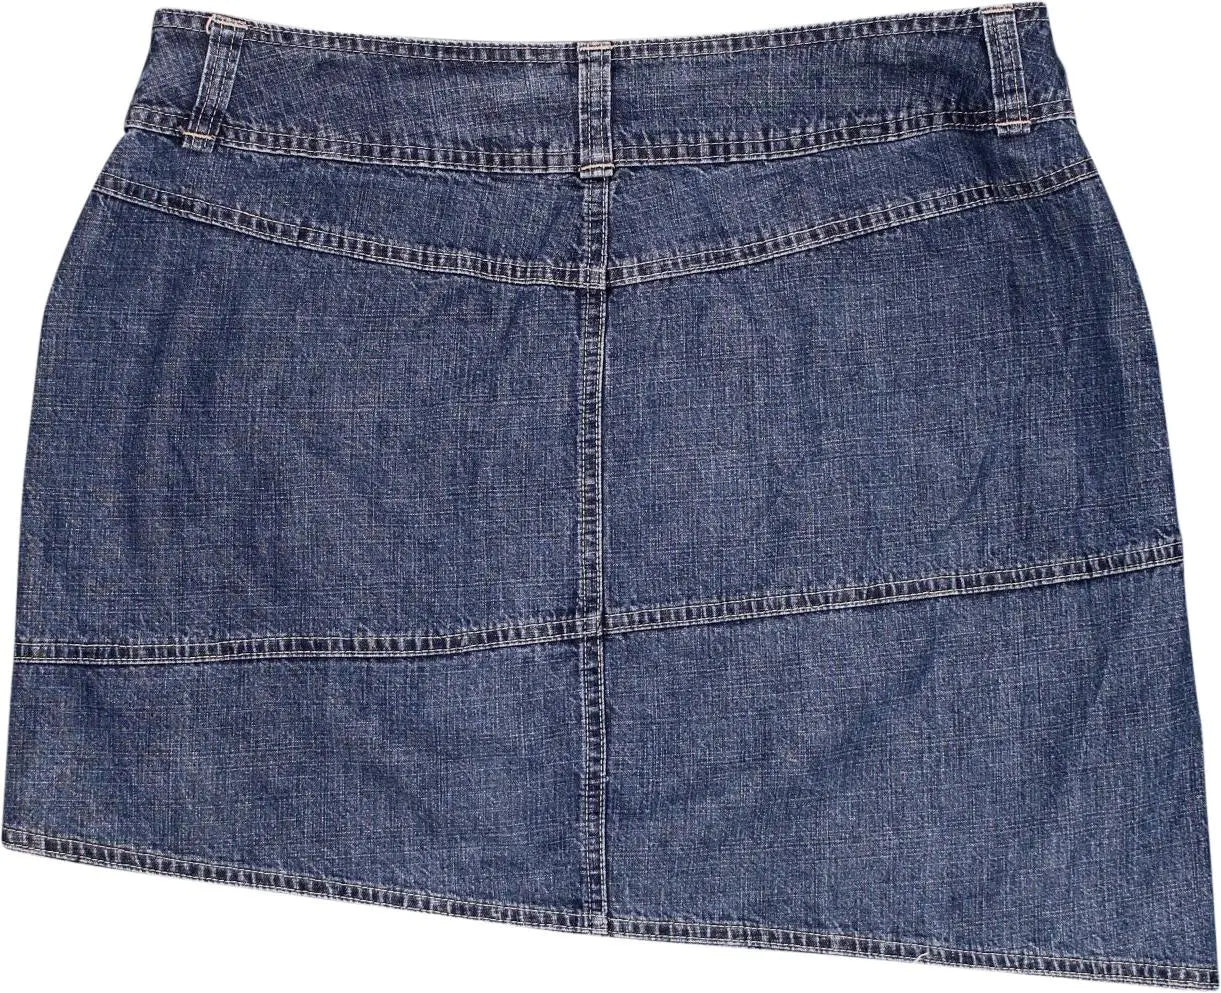 Unknown - Denim Skirt- ThriftTale.com - Vintage and second handclothing